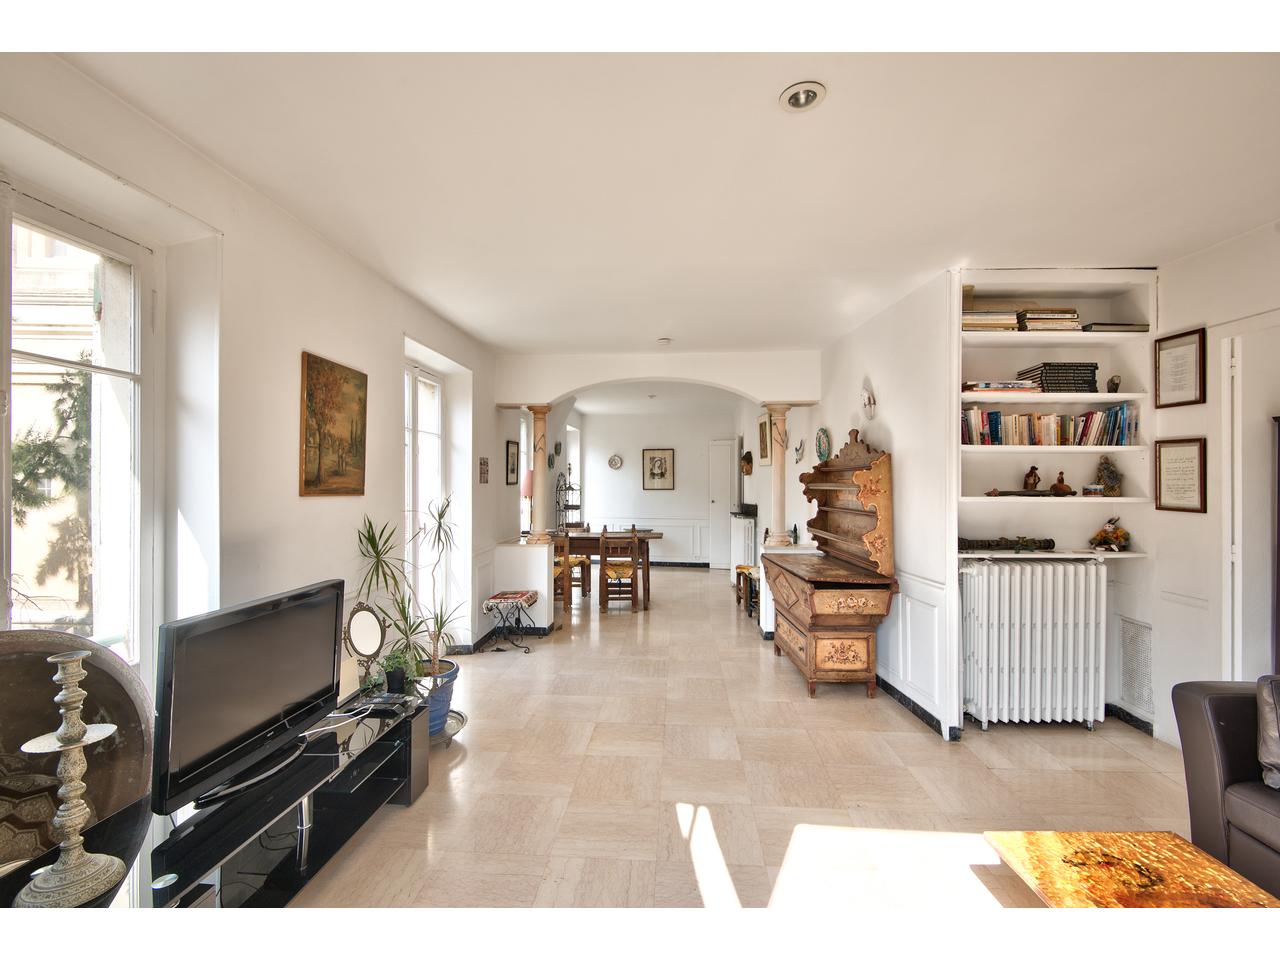 Nice Riviera - Real estate agency Nice Côte d'Azur | Appartement  3 Rooms 70.08m2  for sale   475 000 €